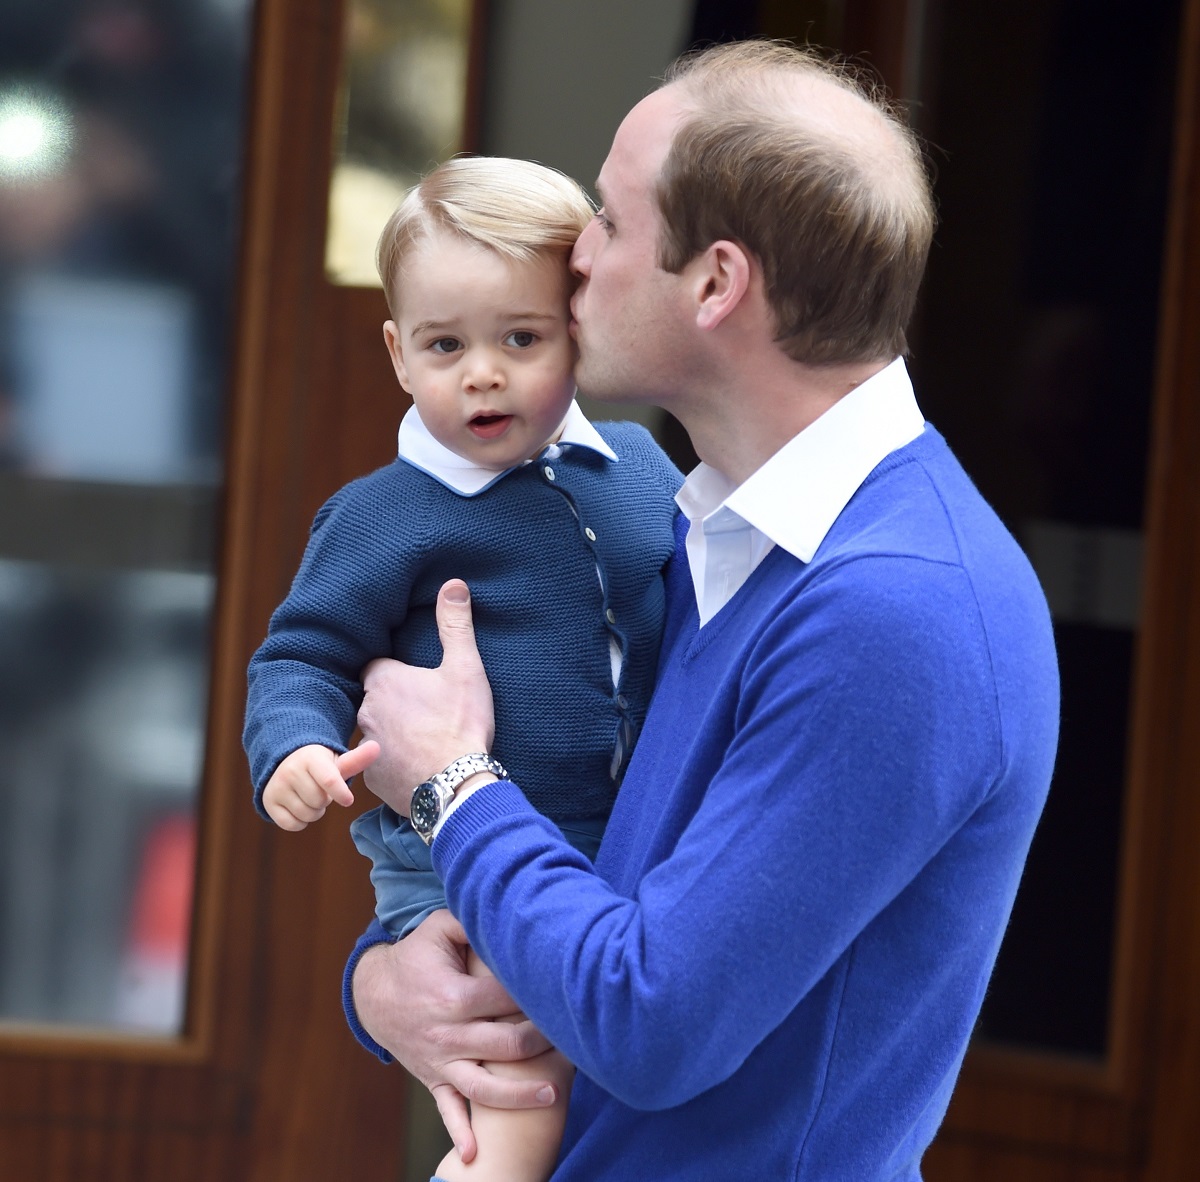 Prince William giving his son Prince George a kiss outside the Lindo Wing at St. Mary's Hospital